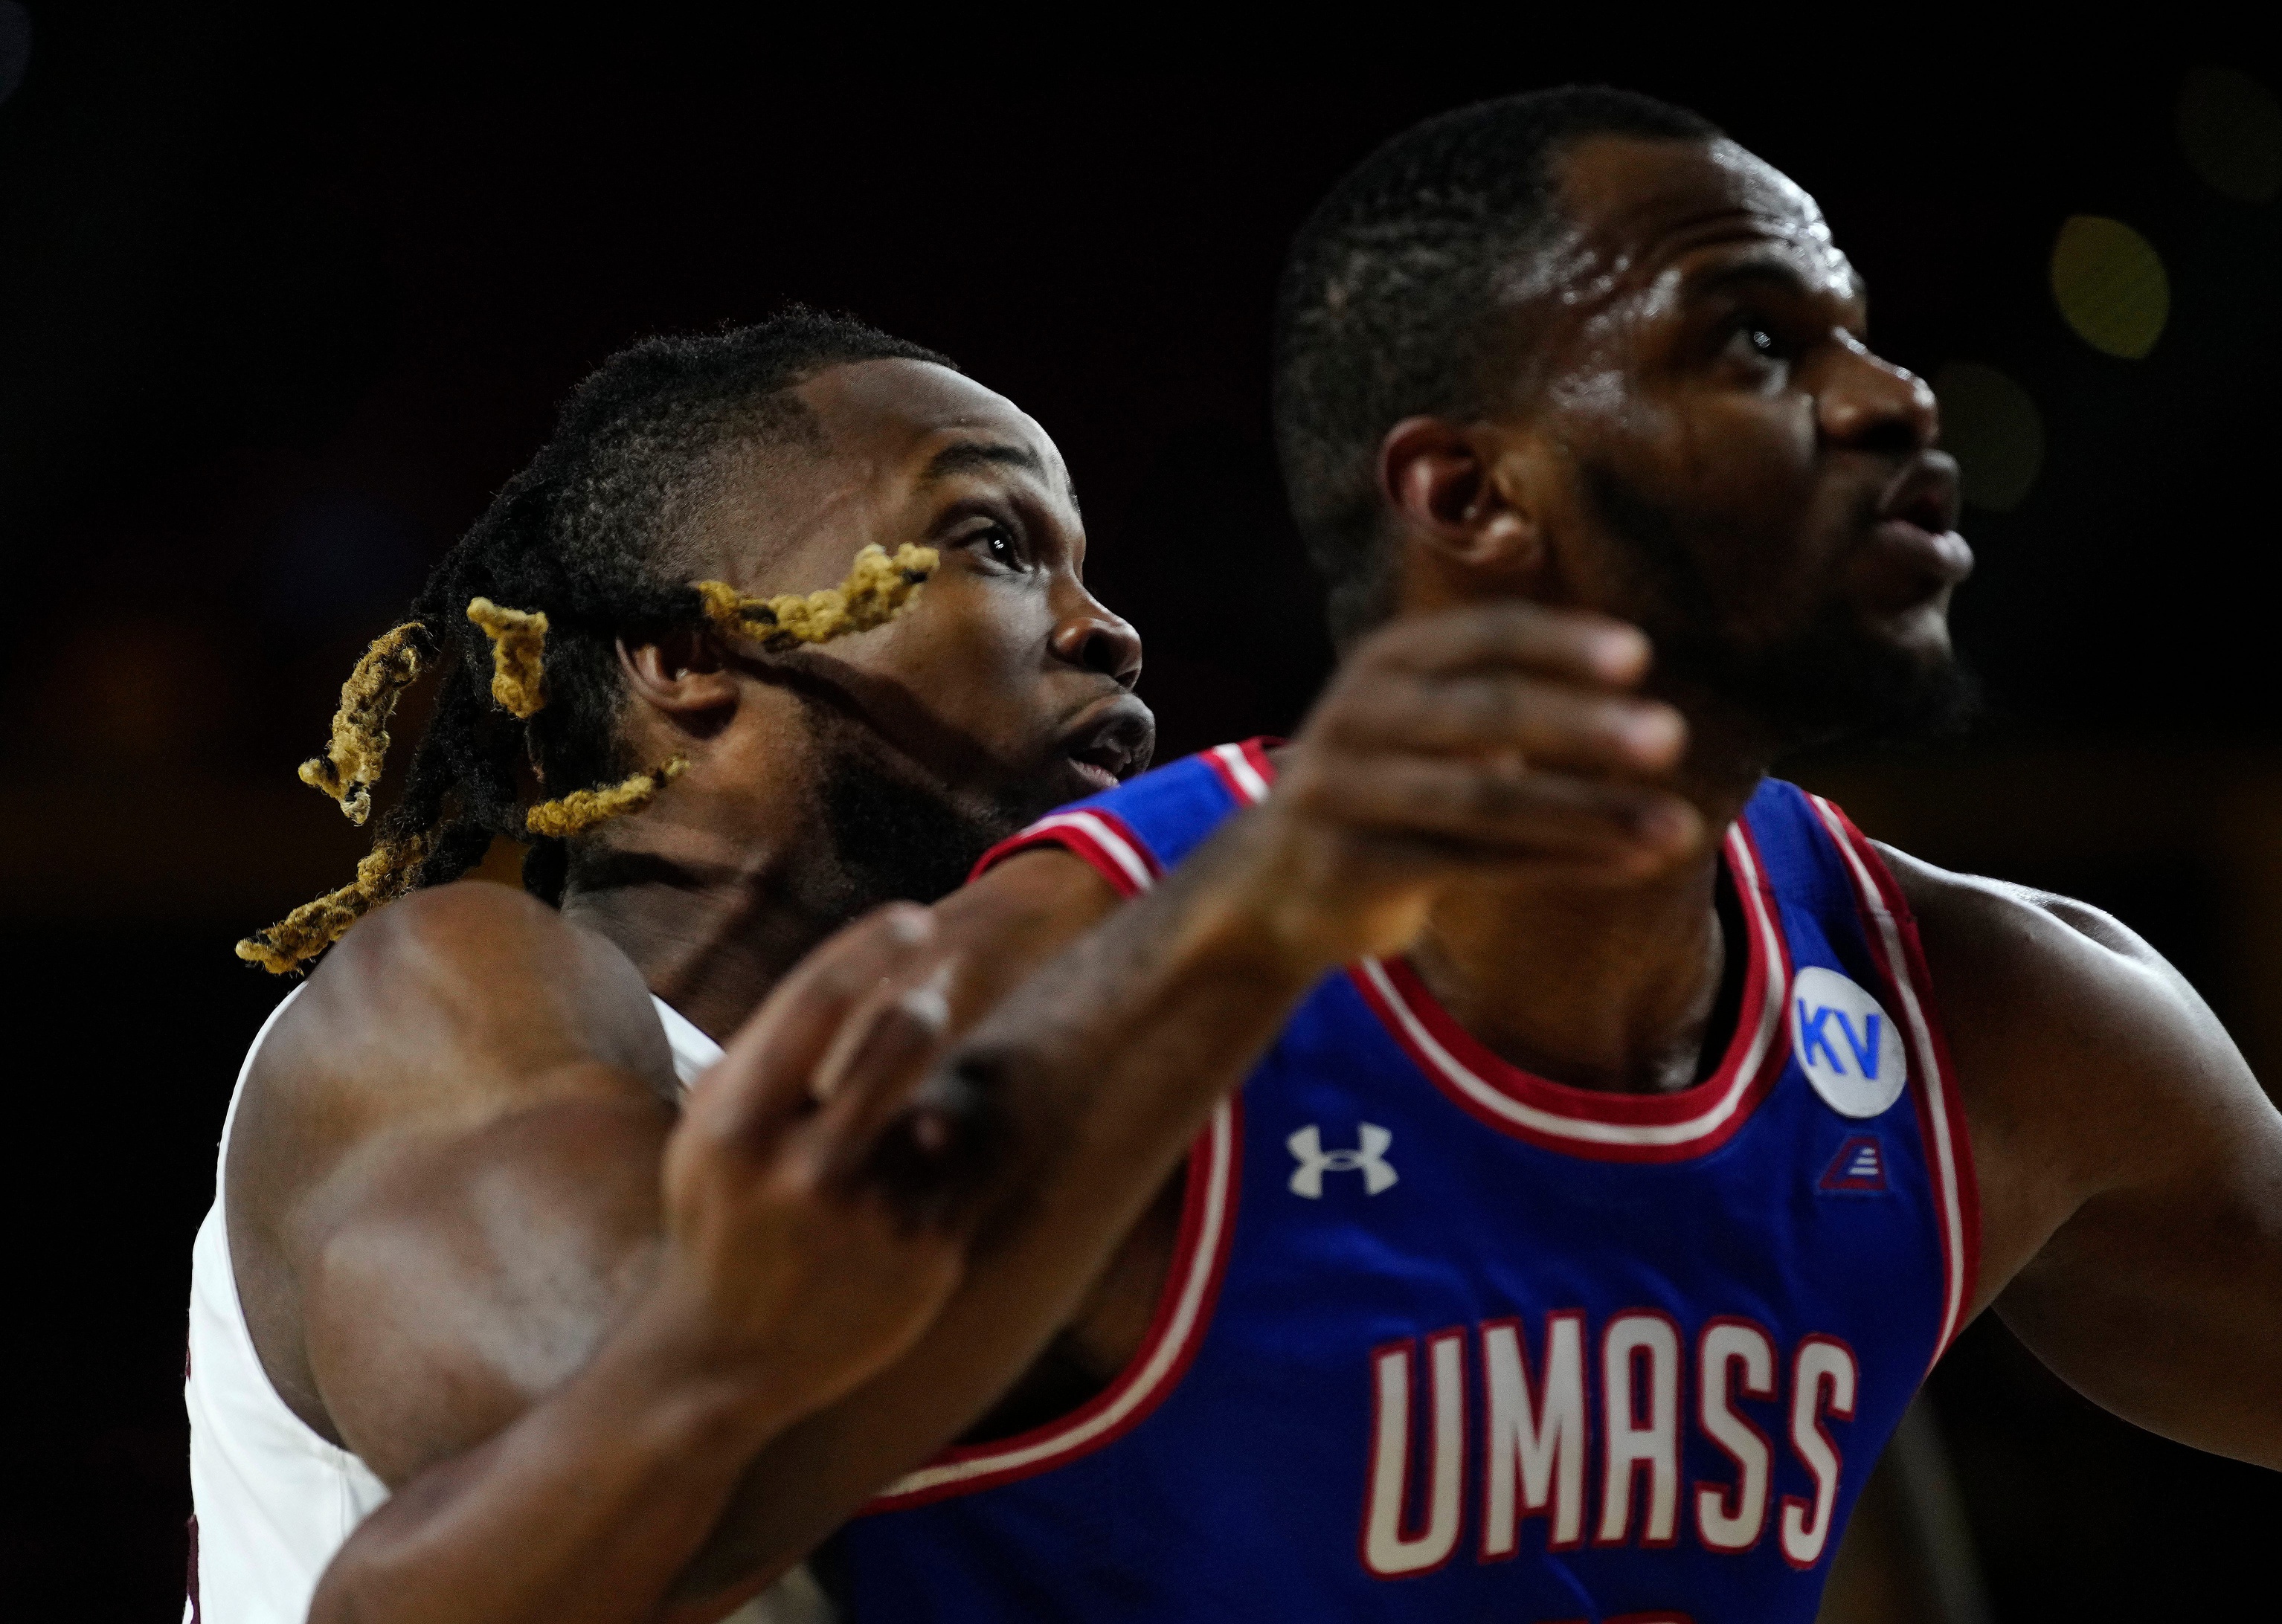 college basketball picks Abdoul Karim Coulibaly UMass Lowell predictions best bet odds